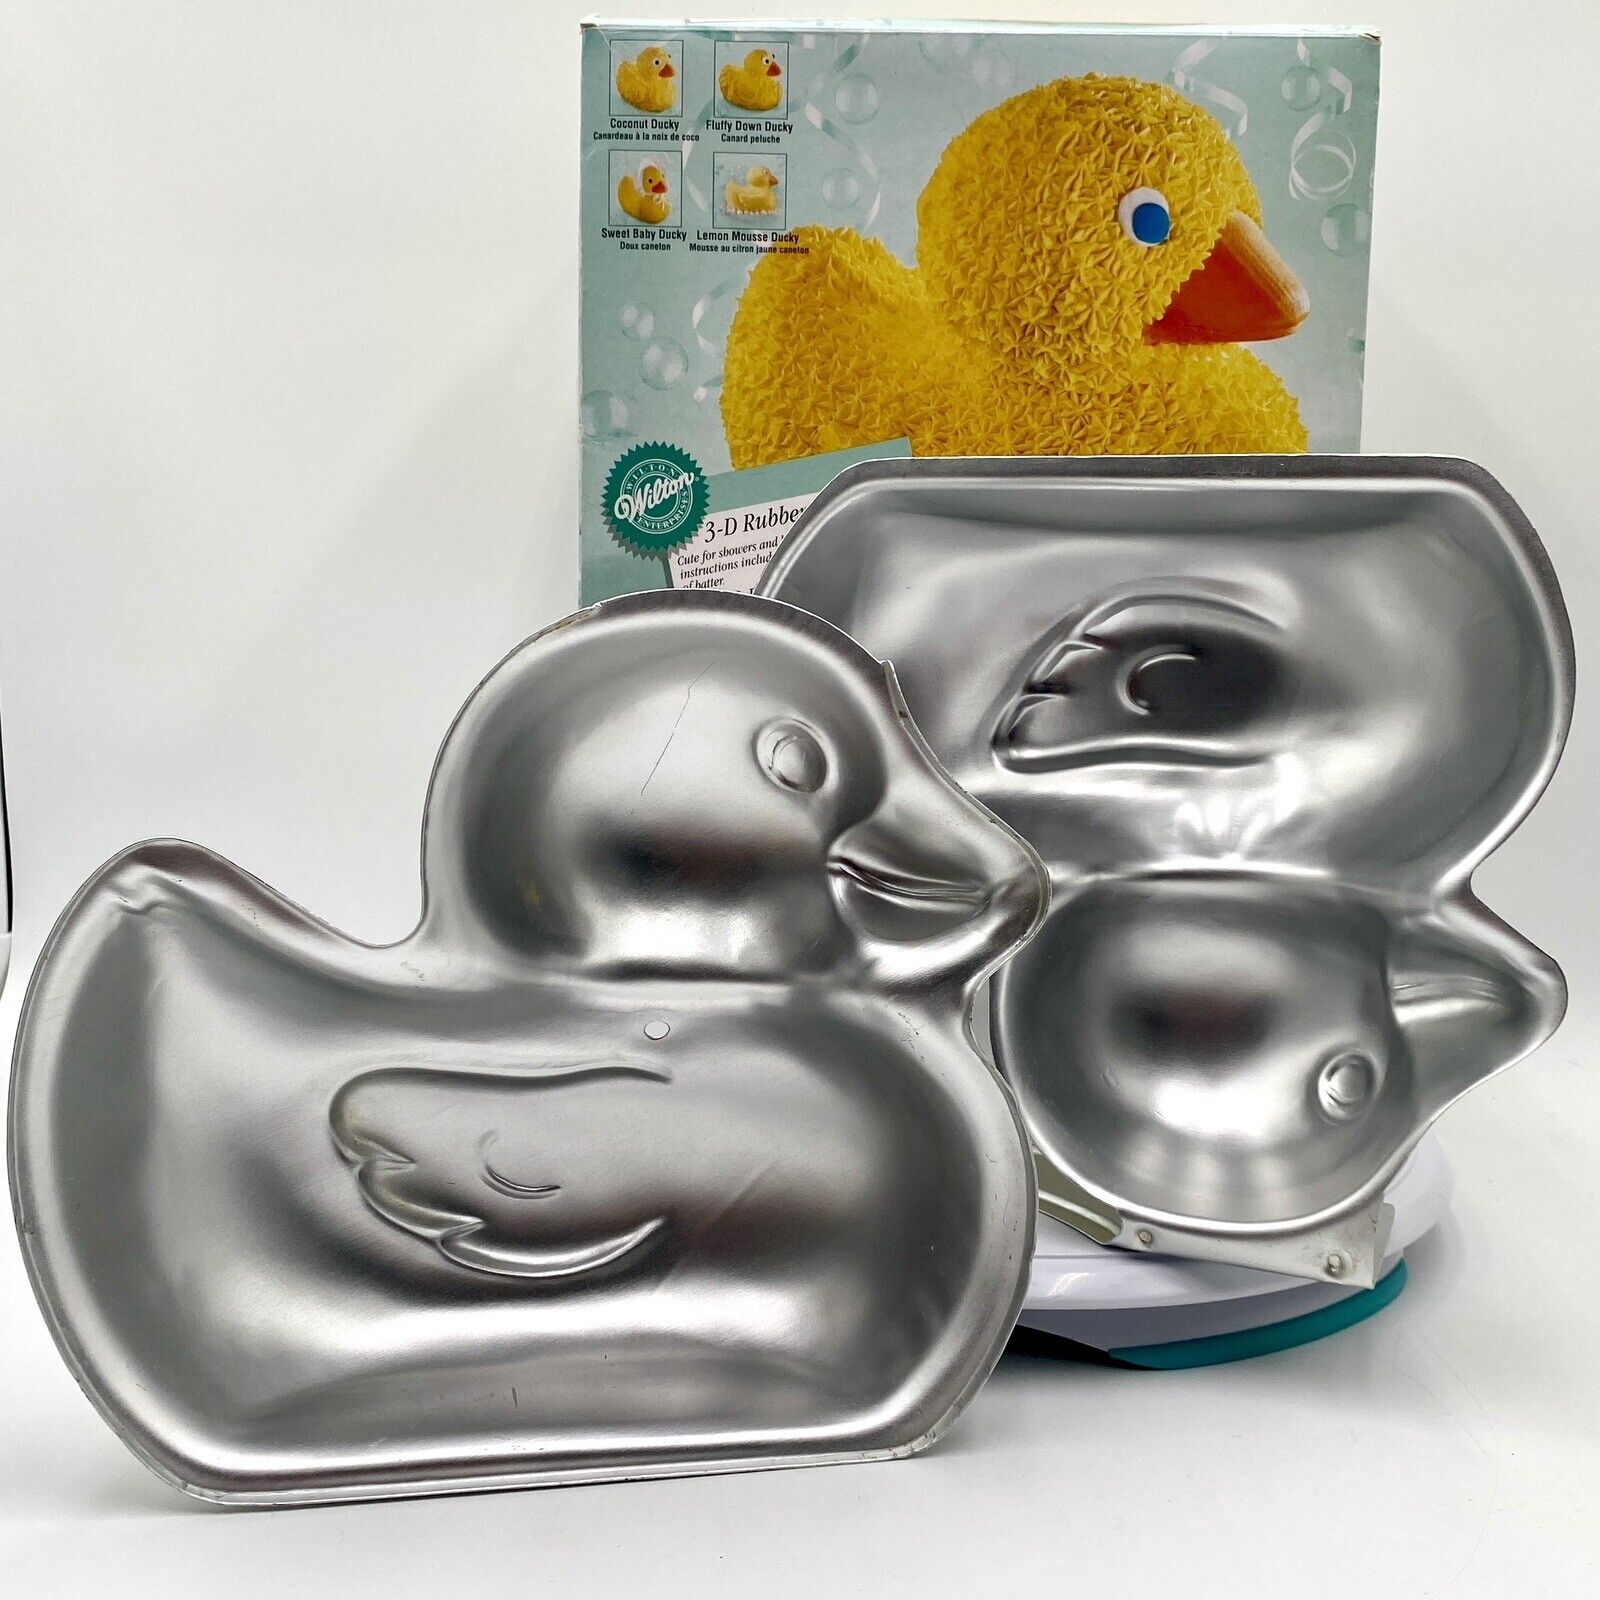 Wilton 3-D Rubber Ducky Stand-Up Cake Pan Duck  2105-2094 Instructions Vintage